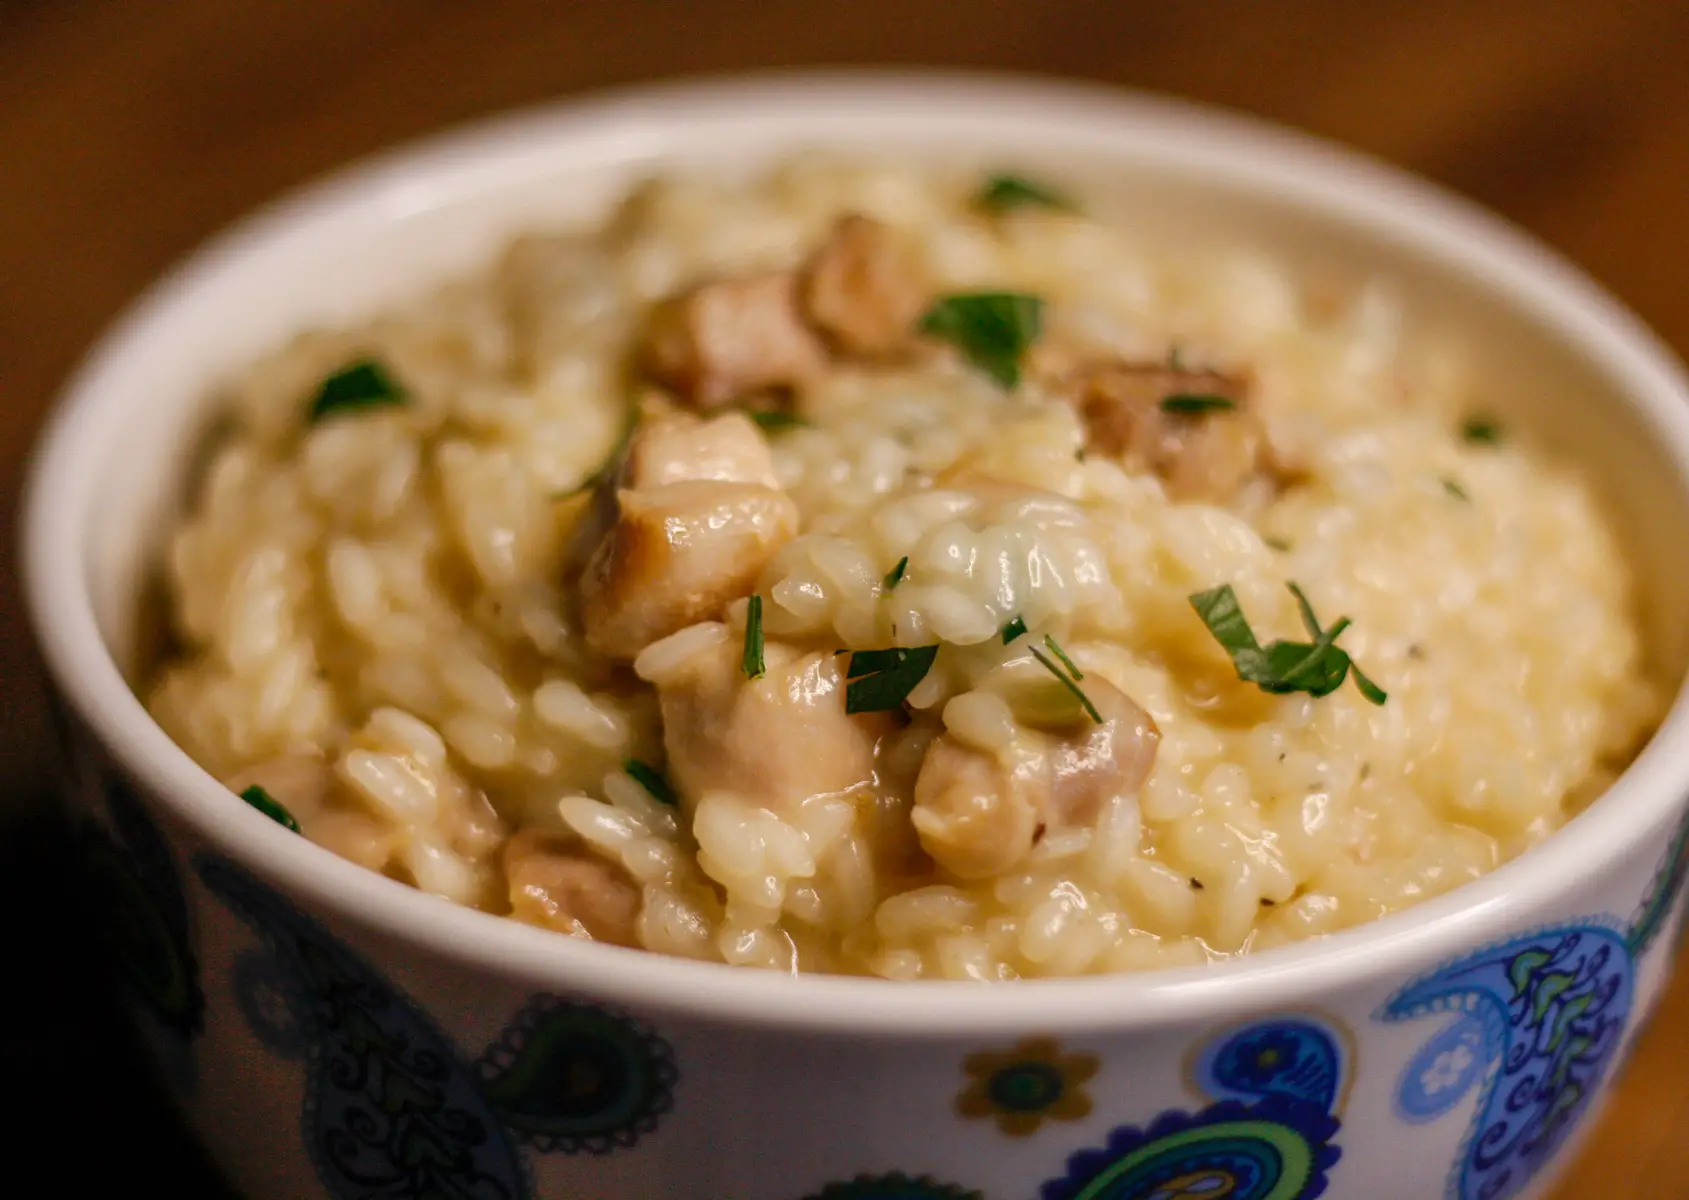 Chicken Risotto garnished with parsley in a bowl with paisley print